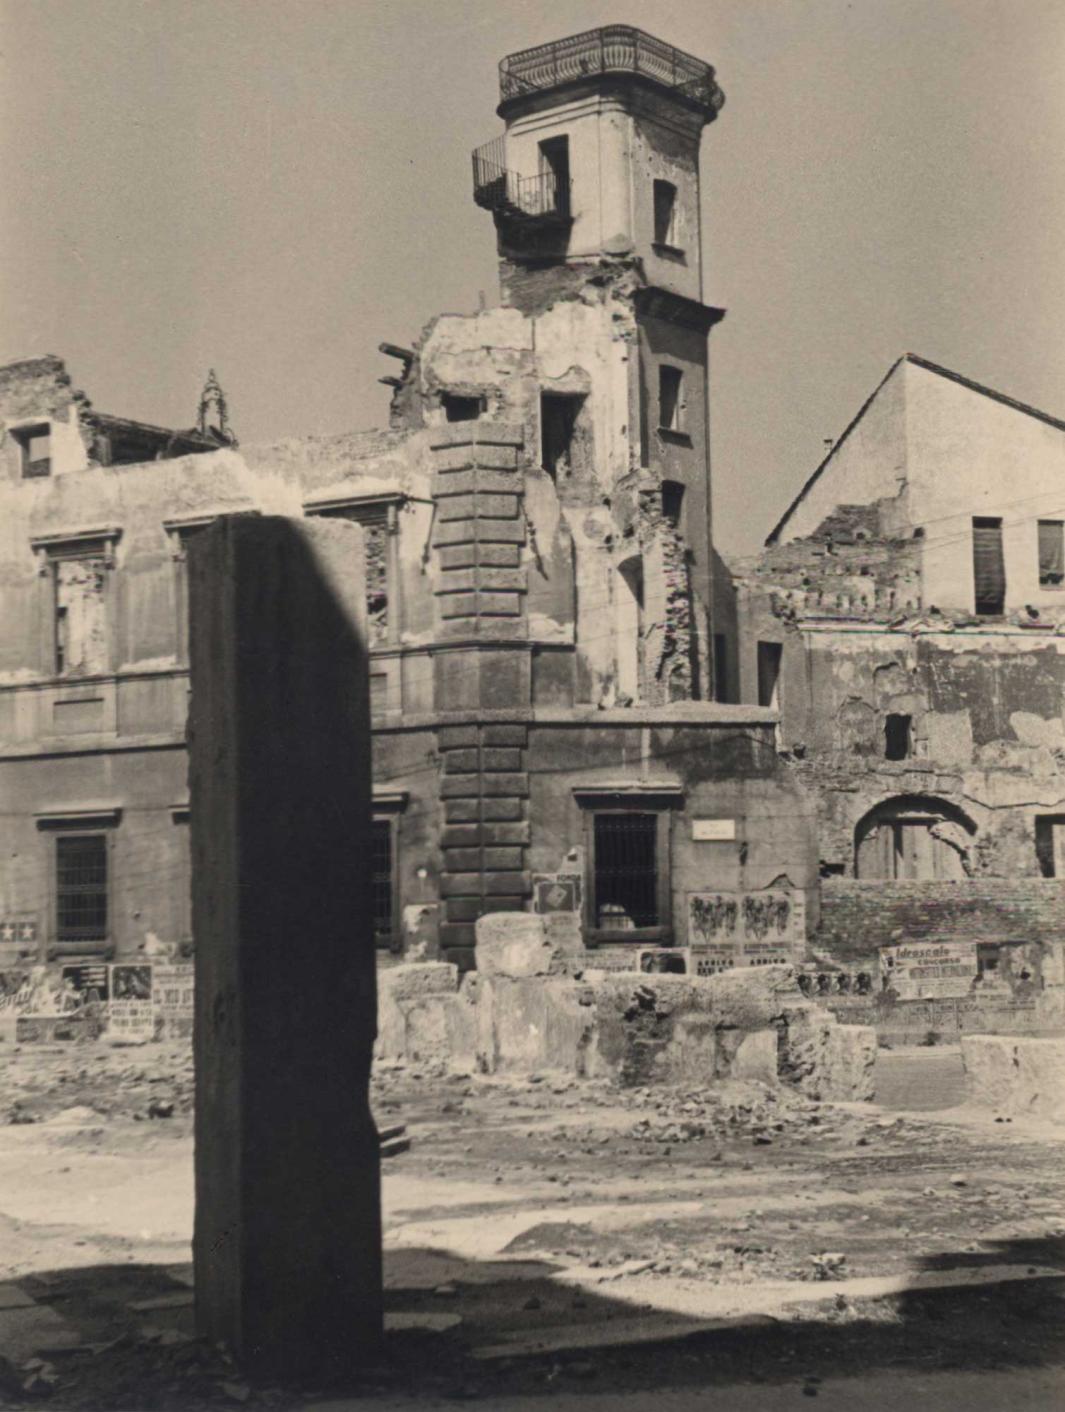 Photograph of a damaged building and tower.